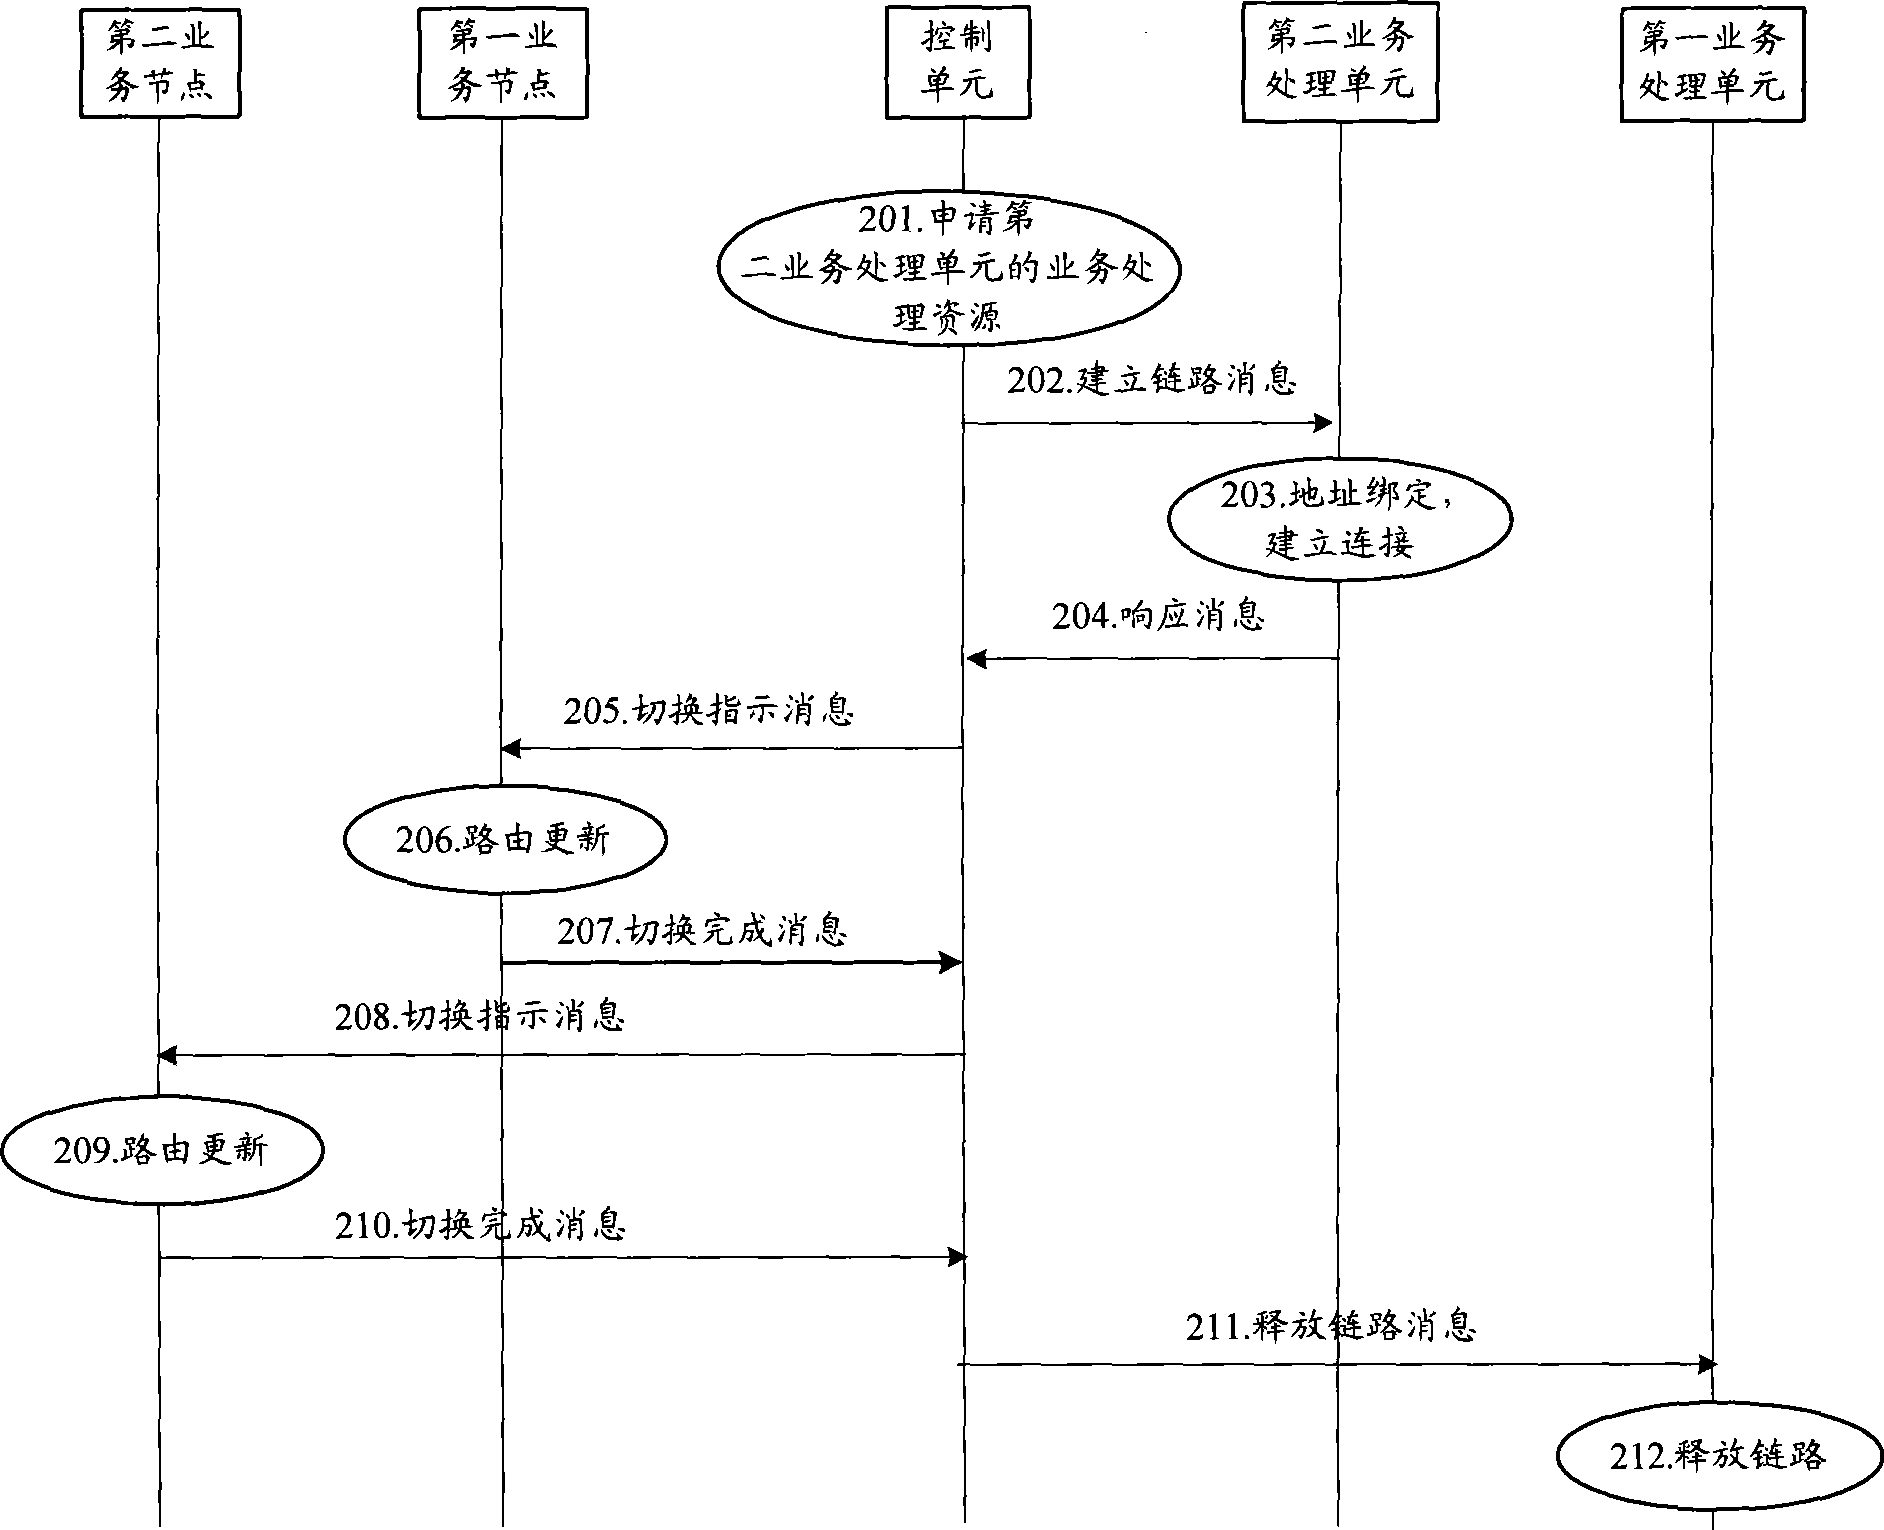 Method and system for switching service link